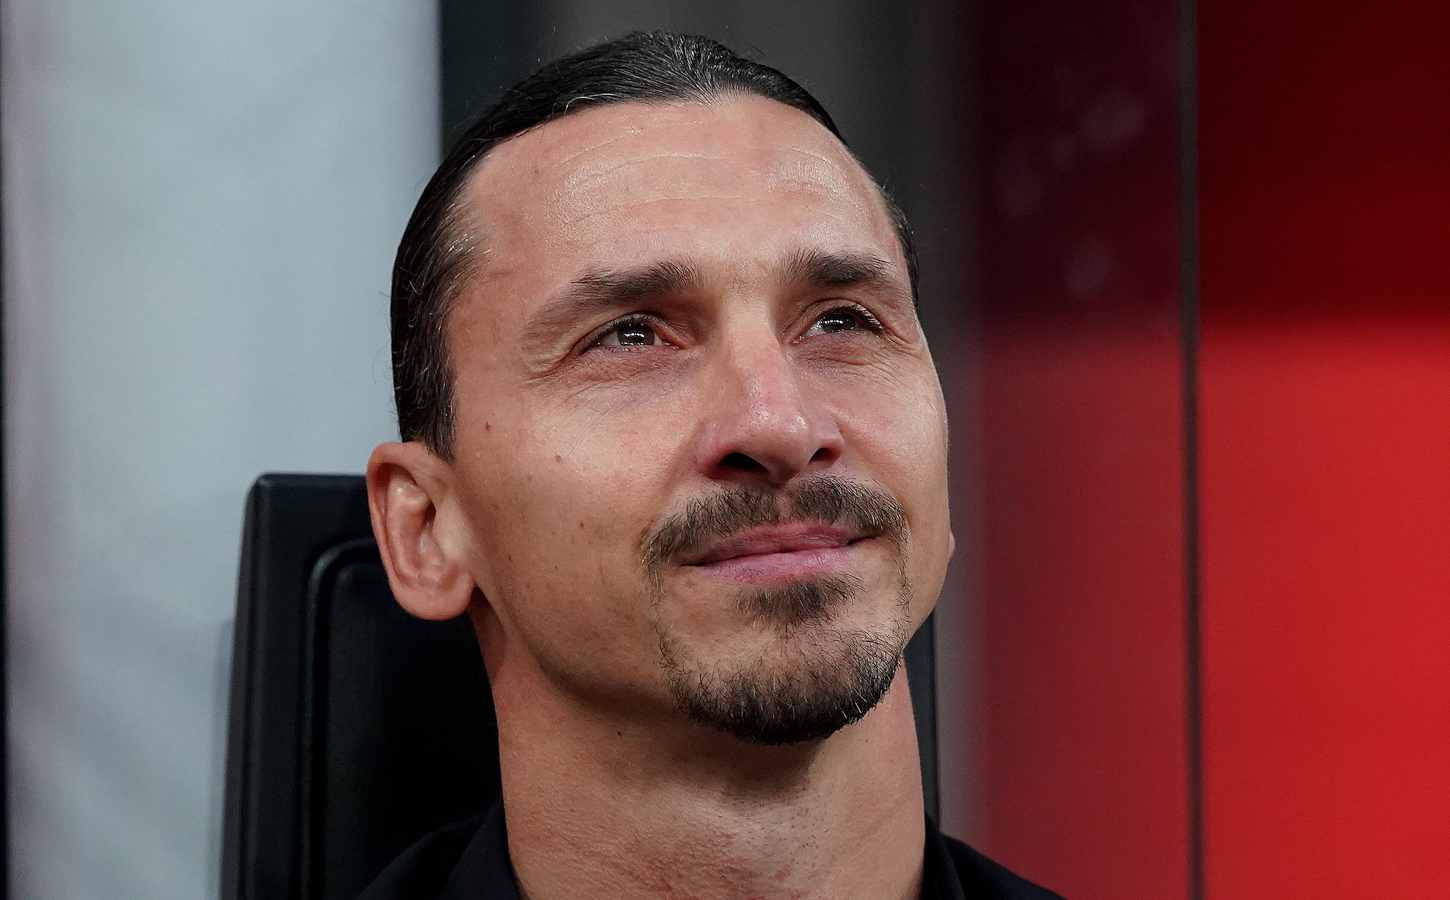 Zlatan Ibrahimovic announces his retirement from football at 41, fans react